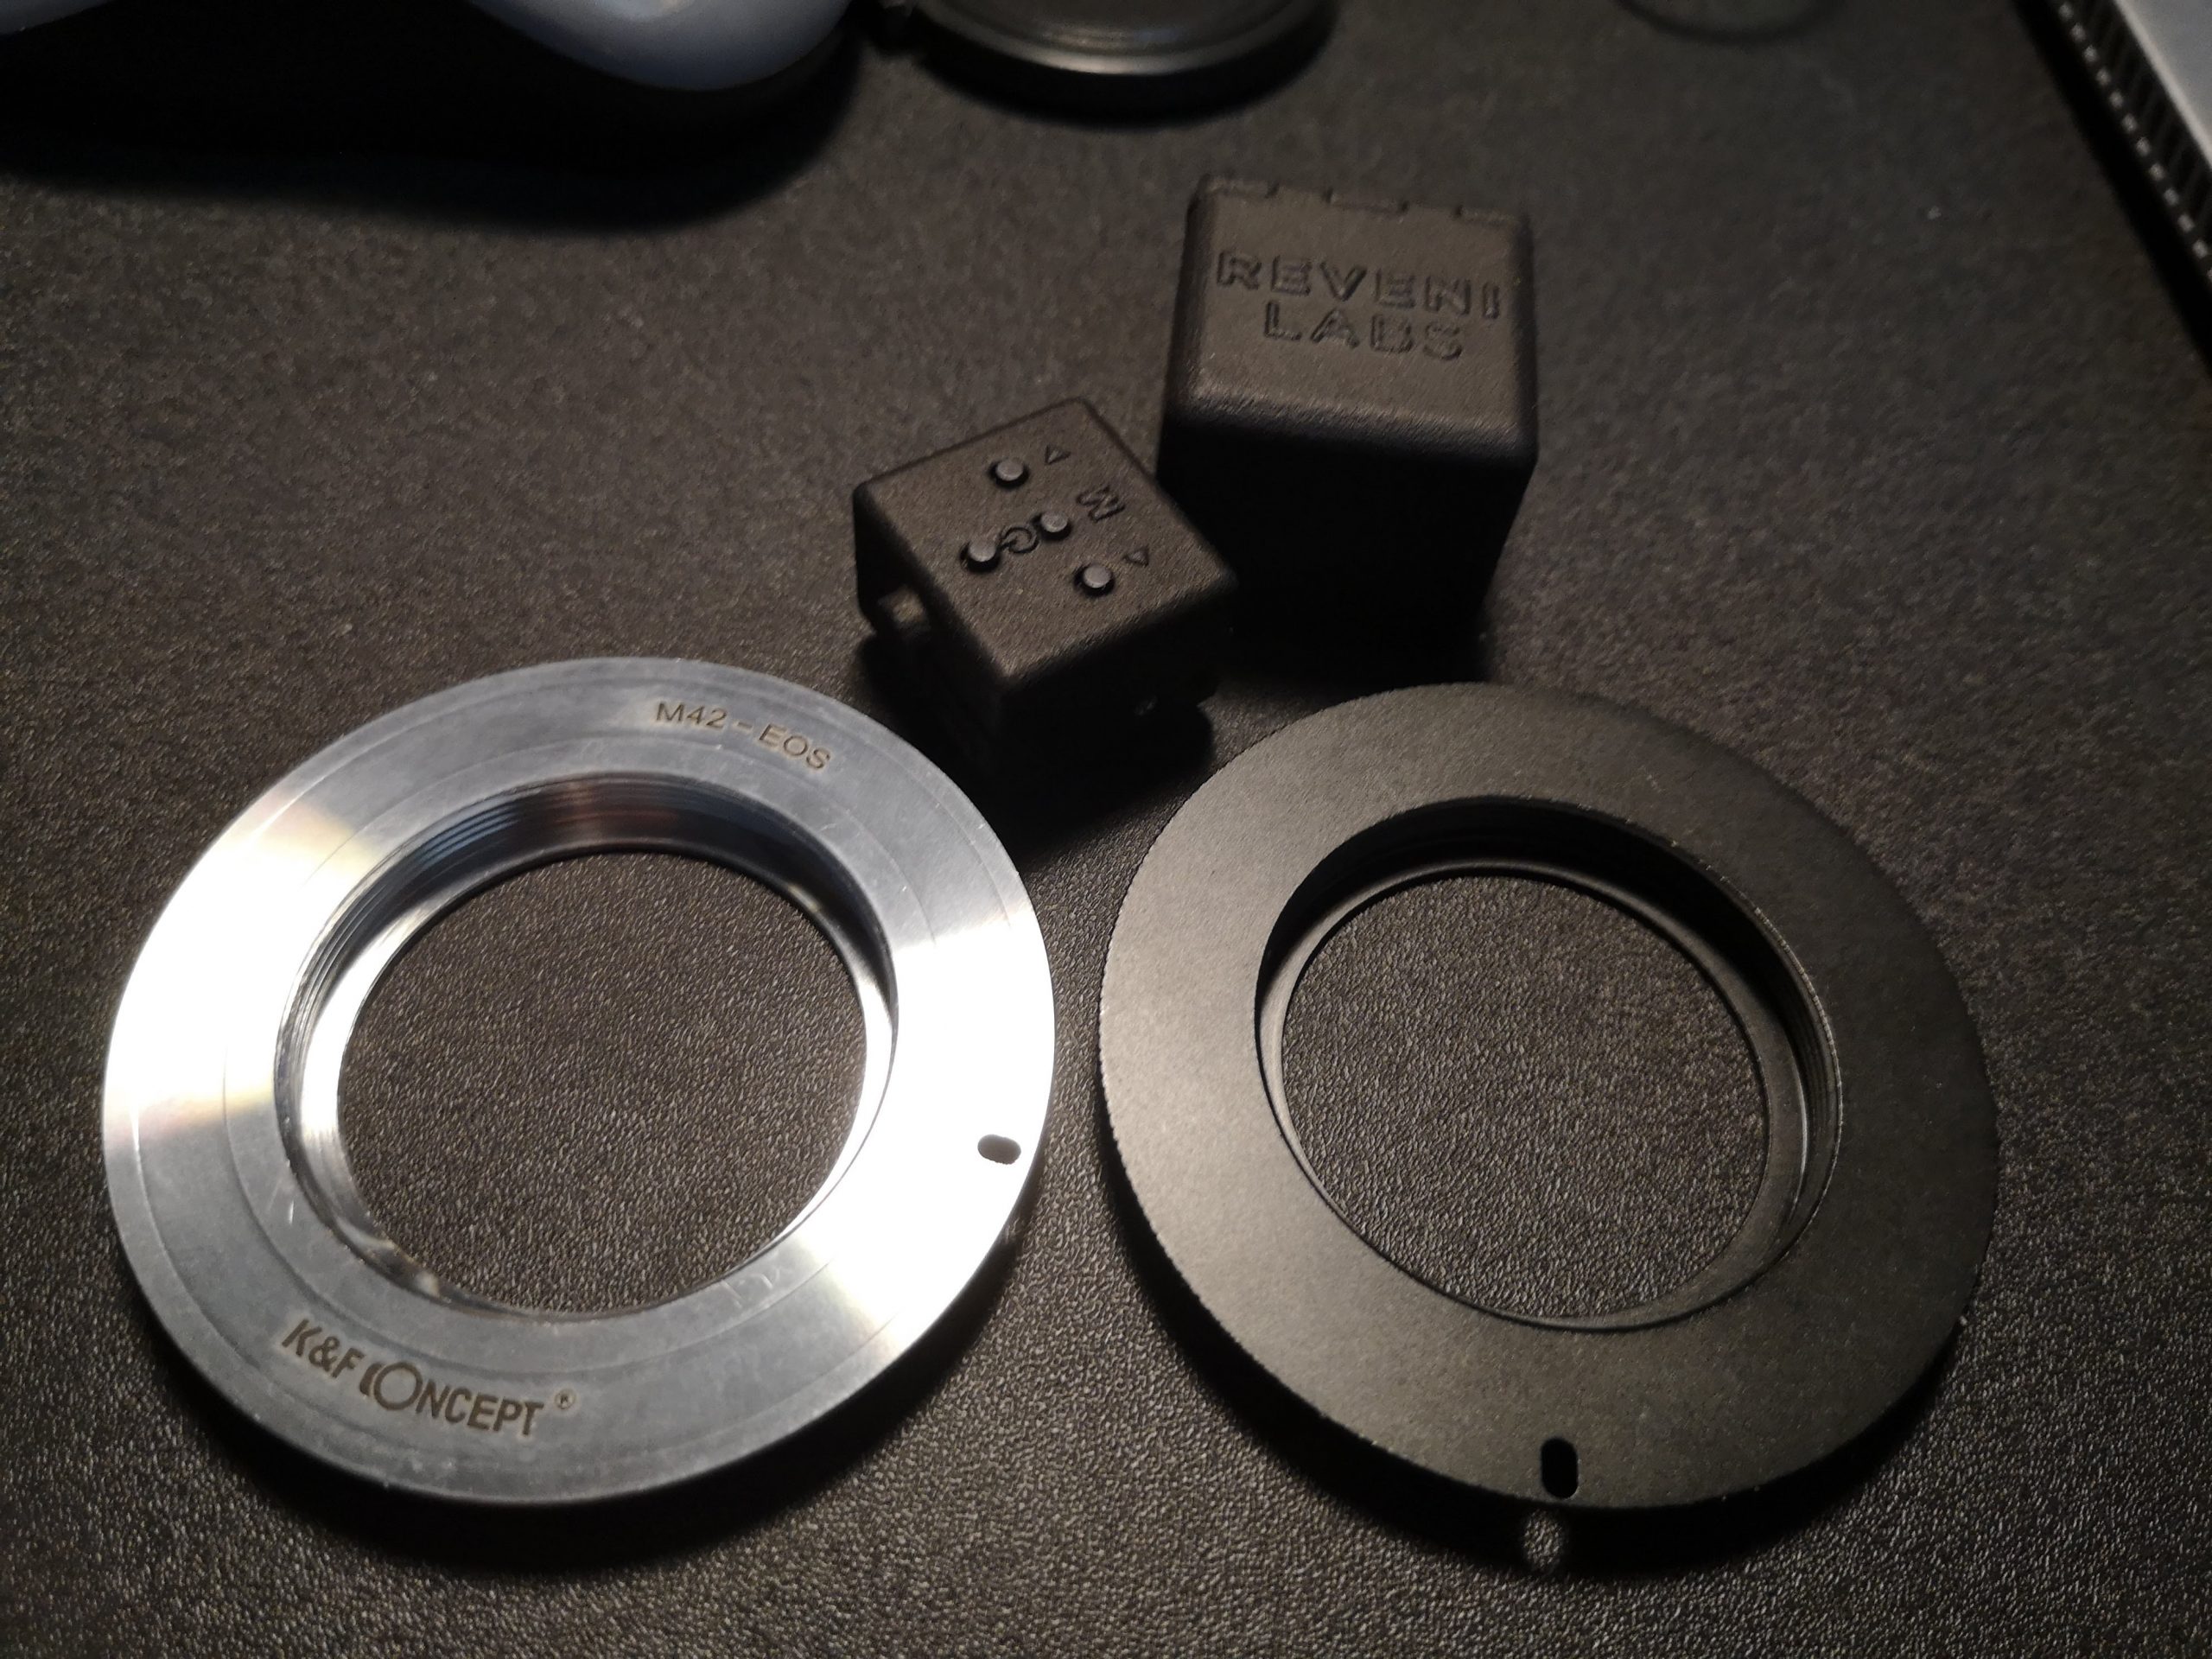 K&F Concept (l)  v generic (r) M42- EF adaptor. So yes the EF-M gets an apology of sorts